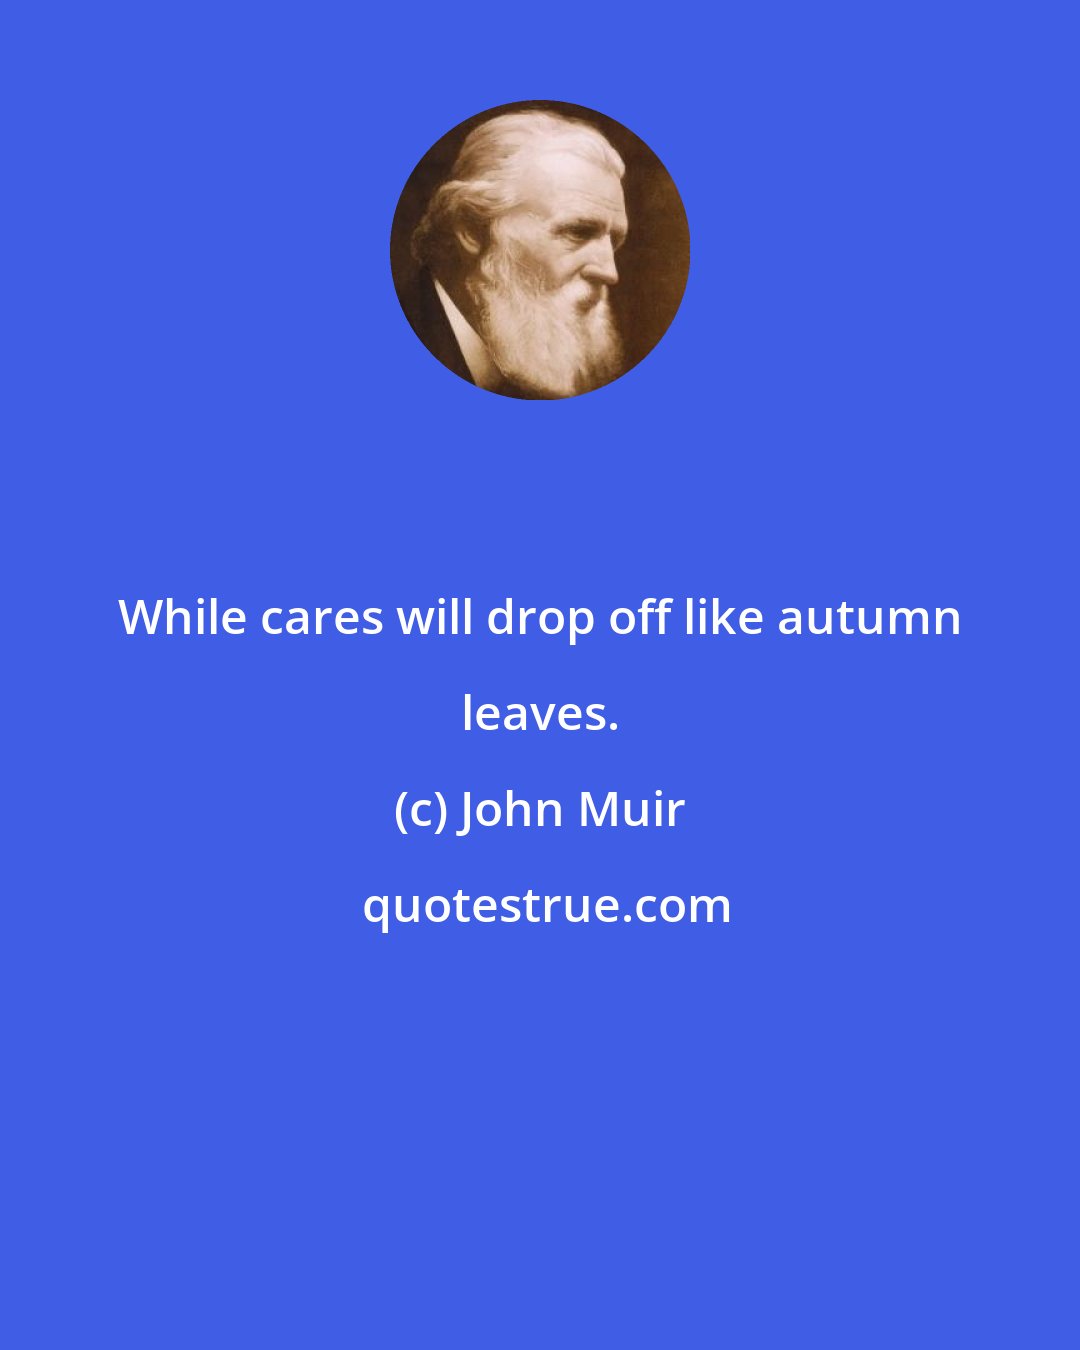 John Muir: While cares will drop off like autumn leaves.